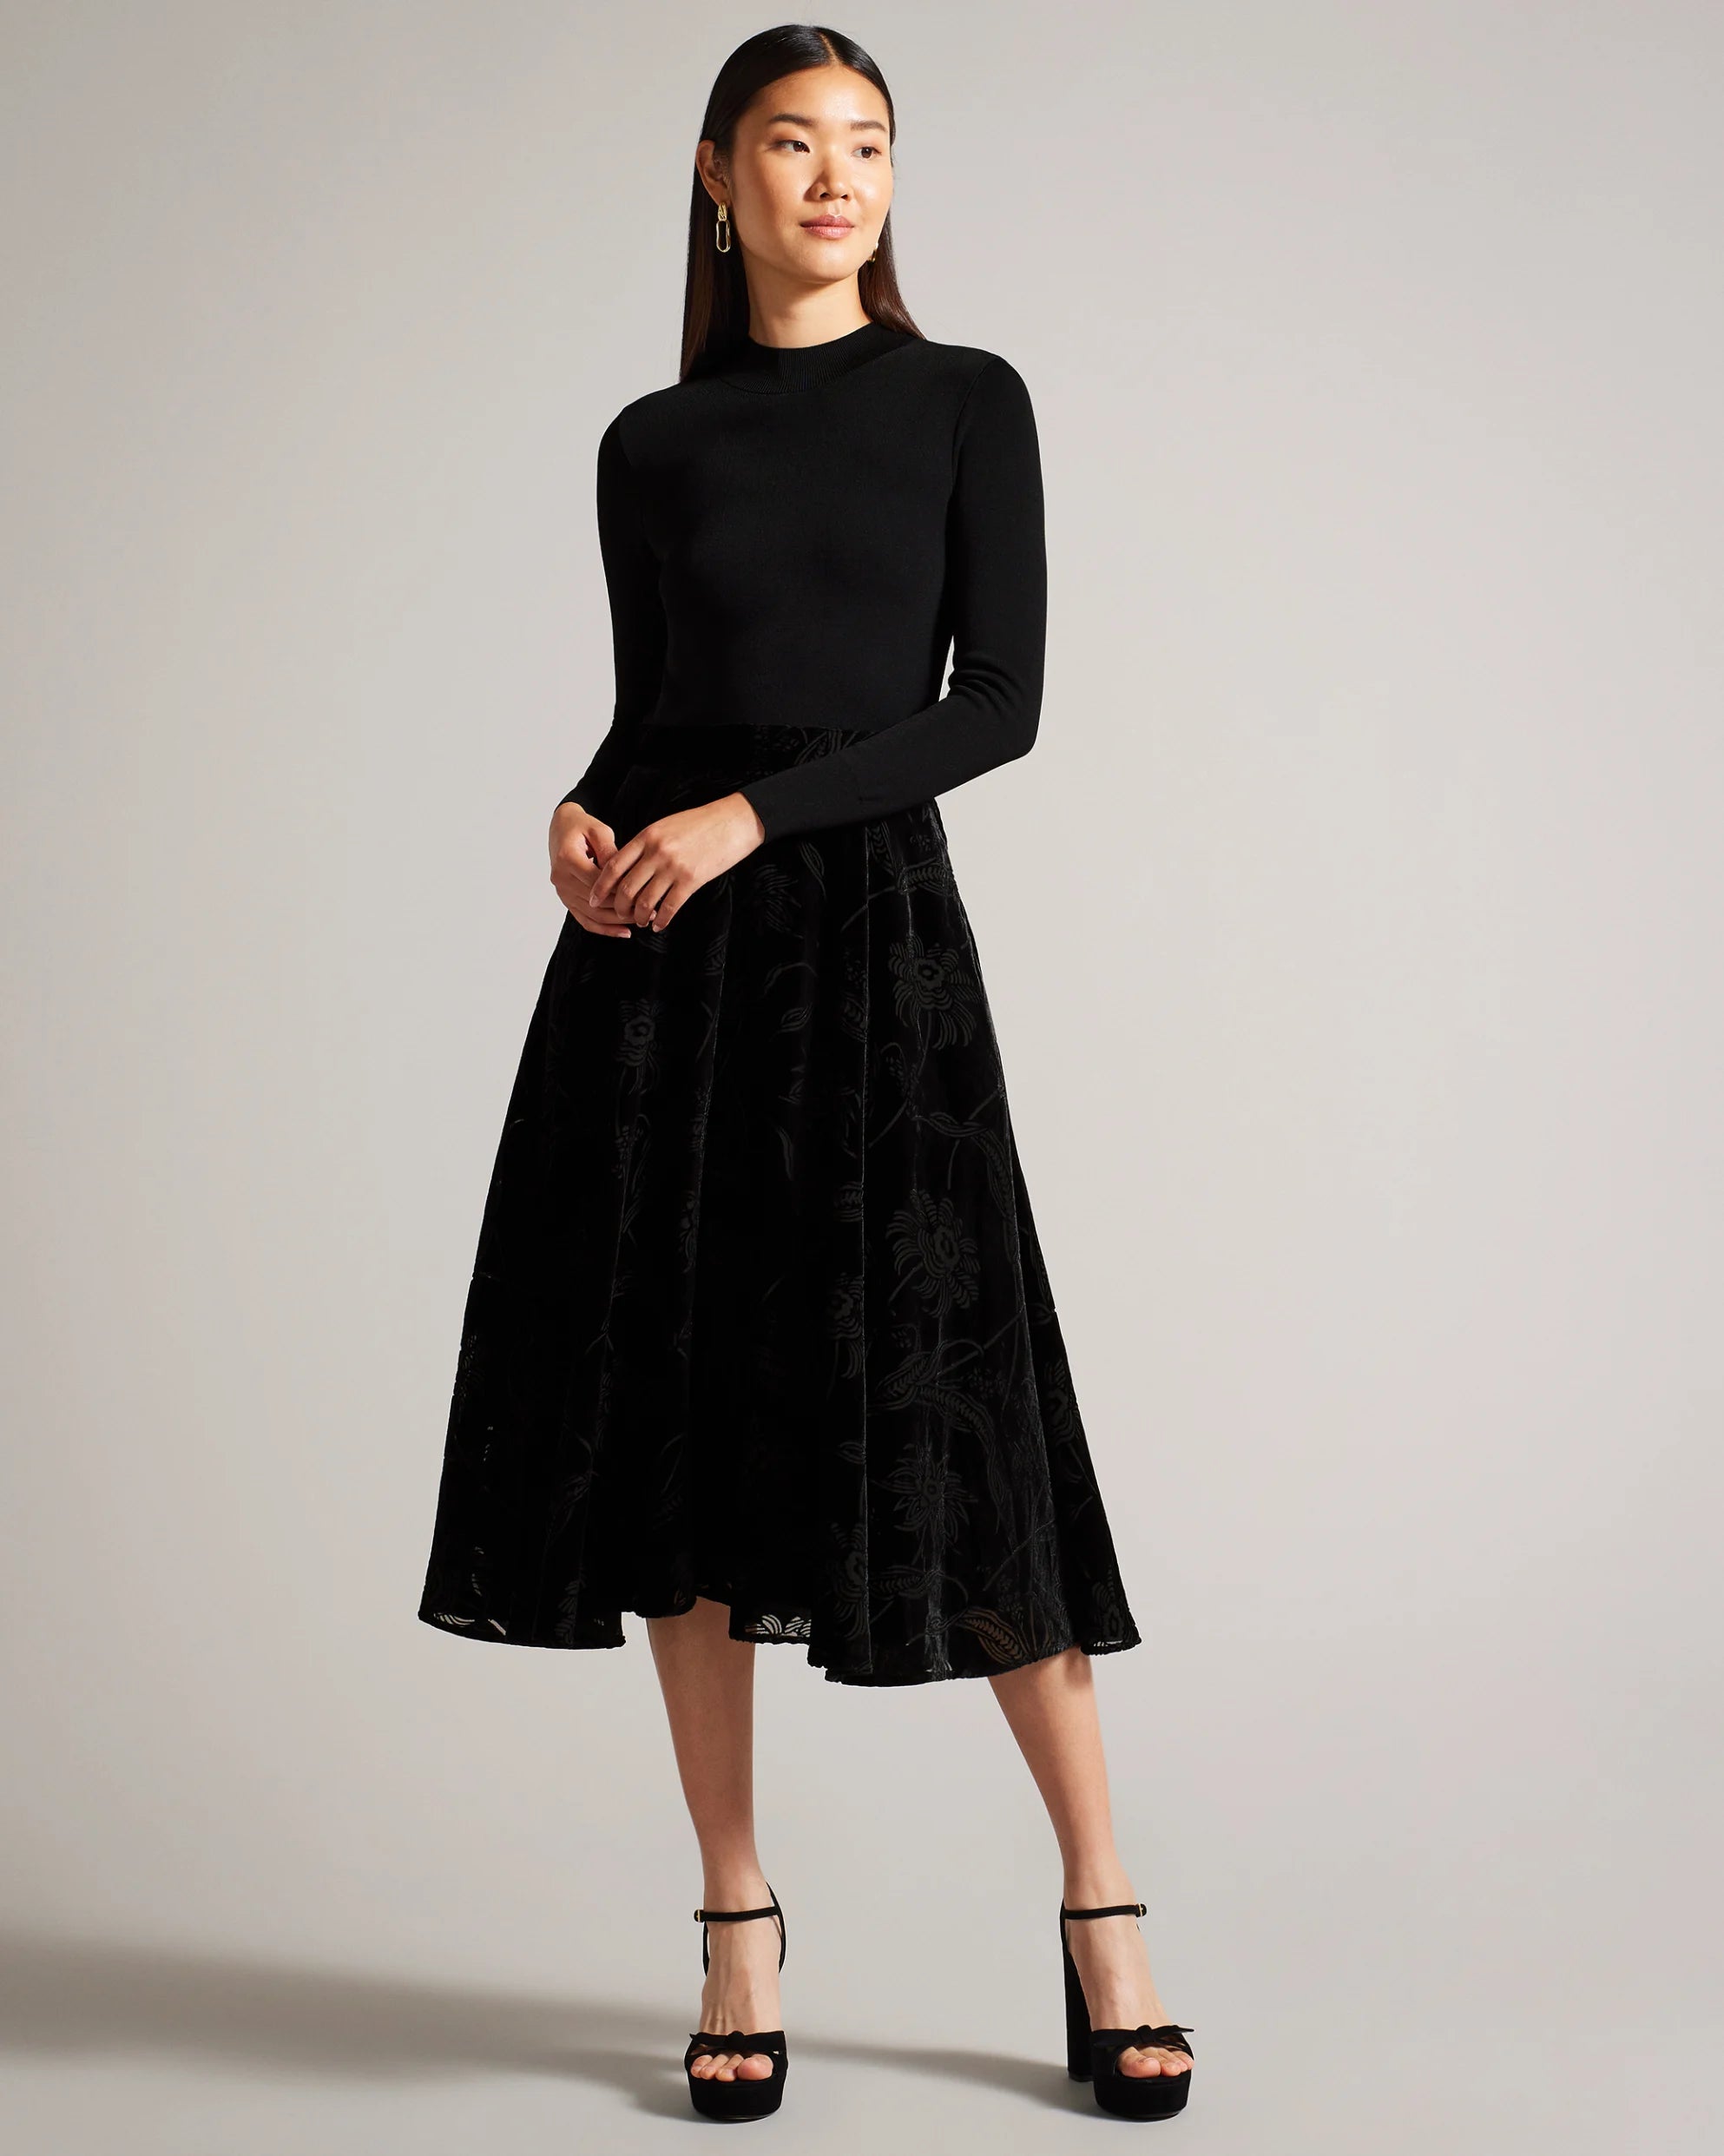 Ted Baker Juliet Knit Midi Dress in Black 271249  | Shop from eightywingold an official brand partner for Ted Baker in Canada and US.